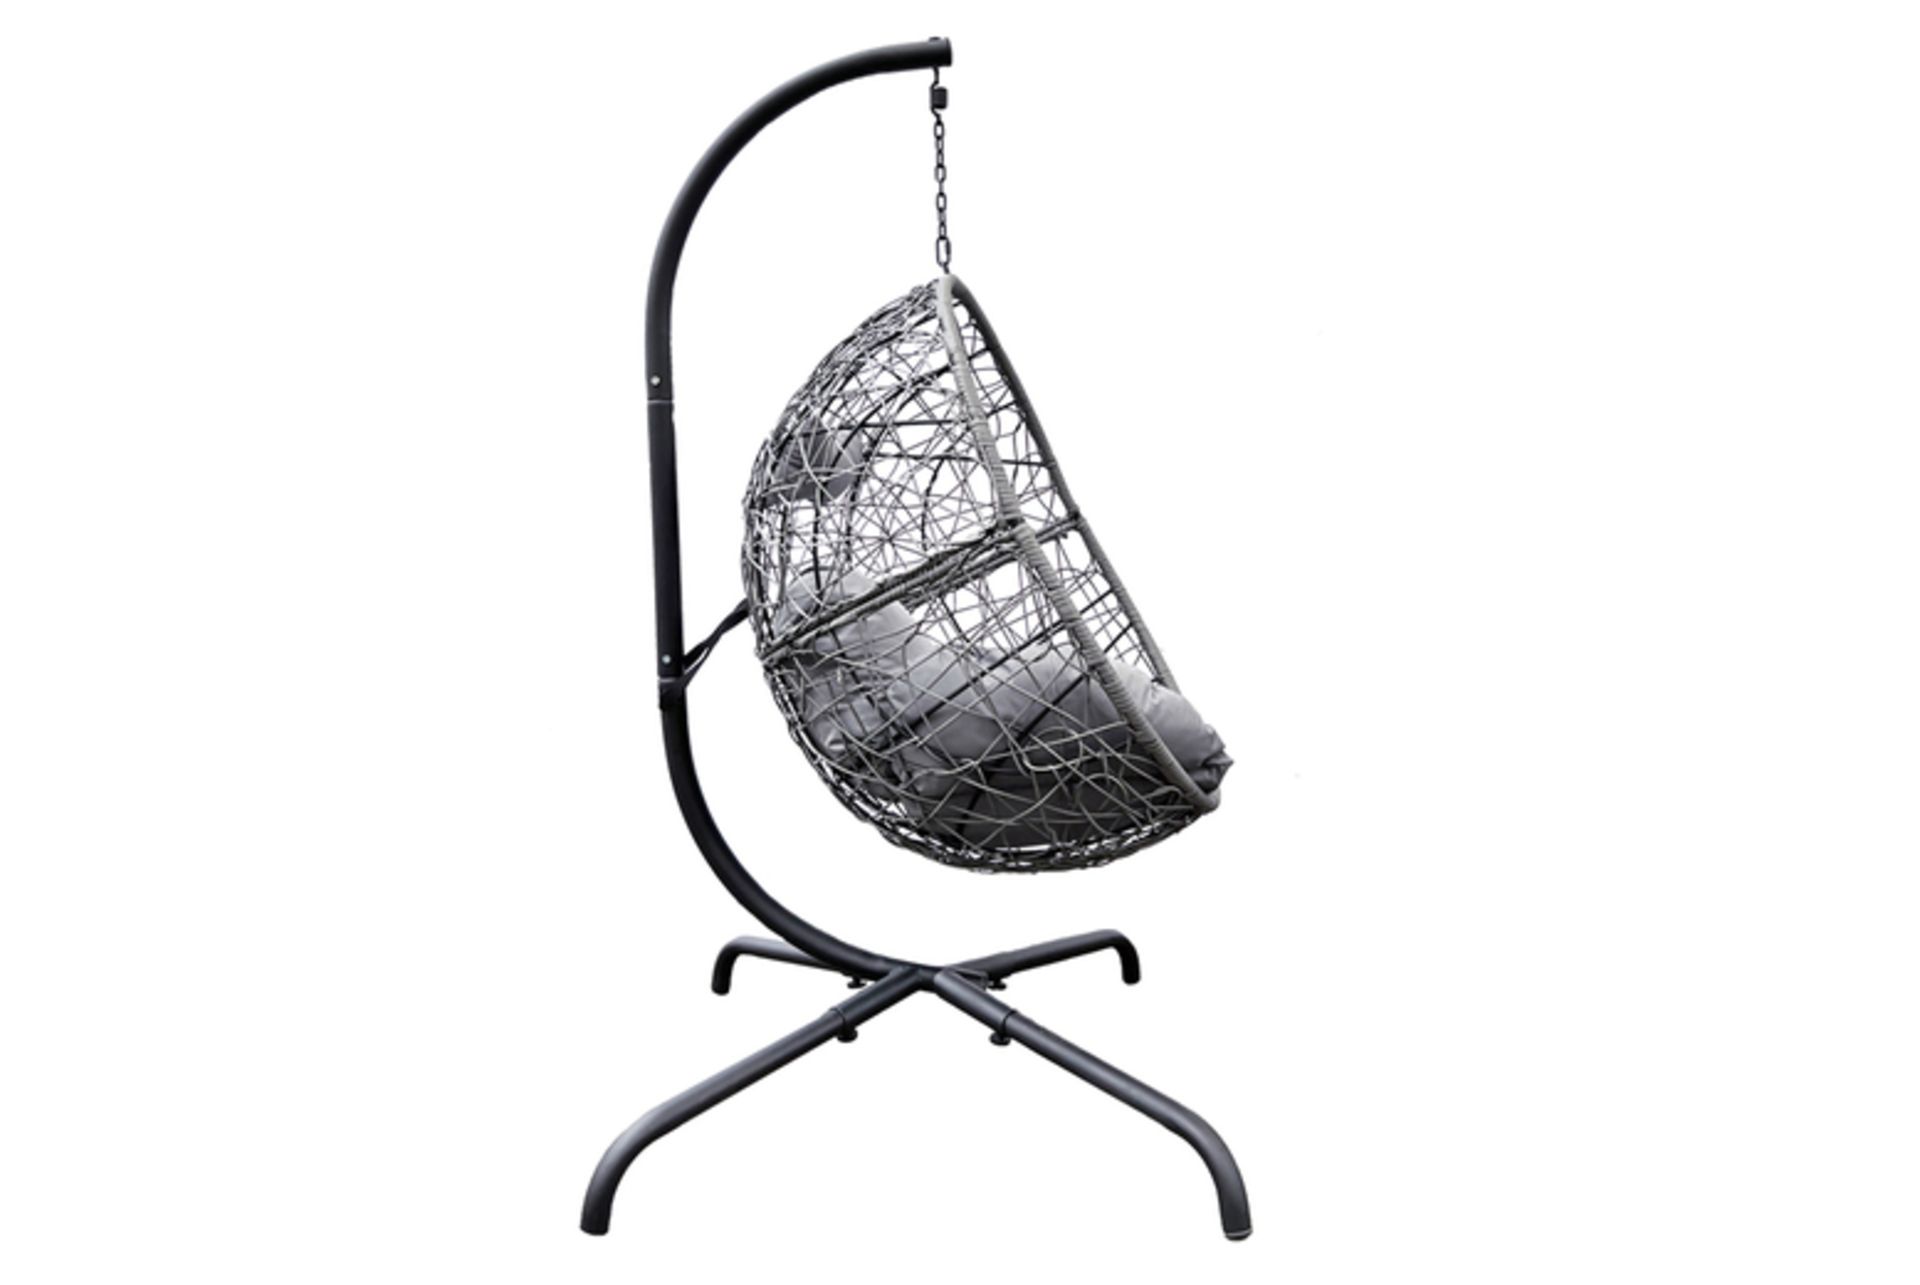 FREE DELIVERY - JOB LOT OF 5X HANGING EGG CHAIR WITH A CUSHION AND PILLOW - GREY - Image 3 of 3